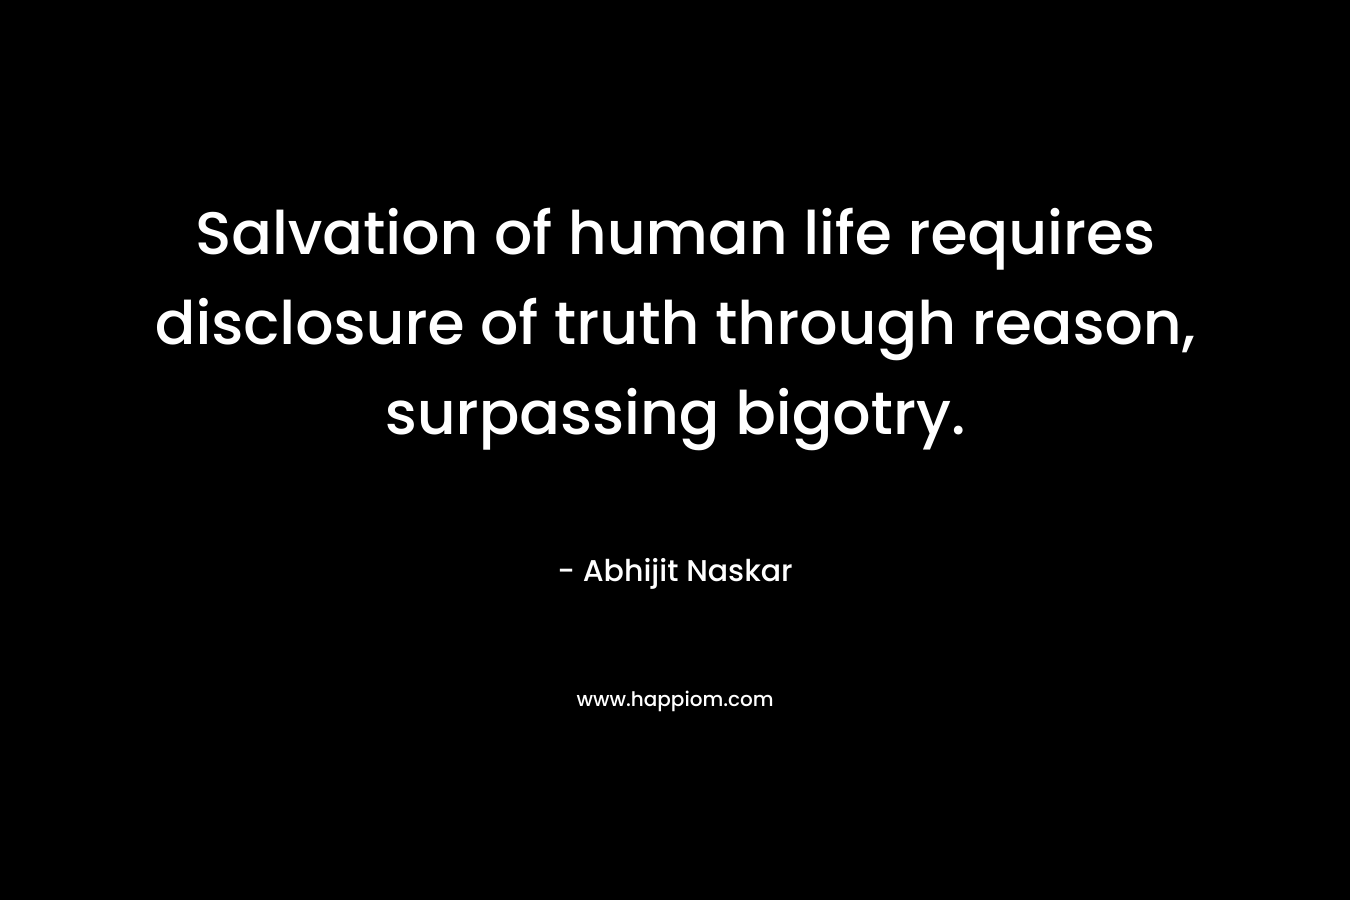 Salvation of human life requires disclosure of truth through reason, surpassing bigotry.